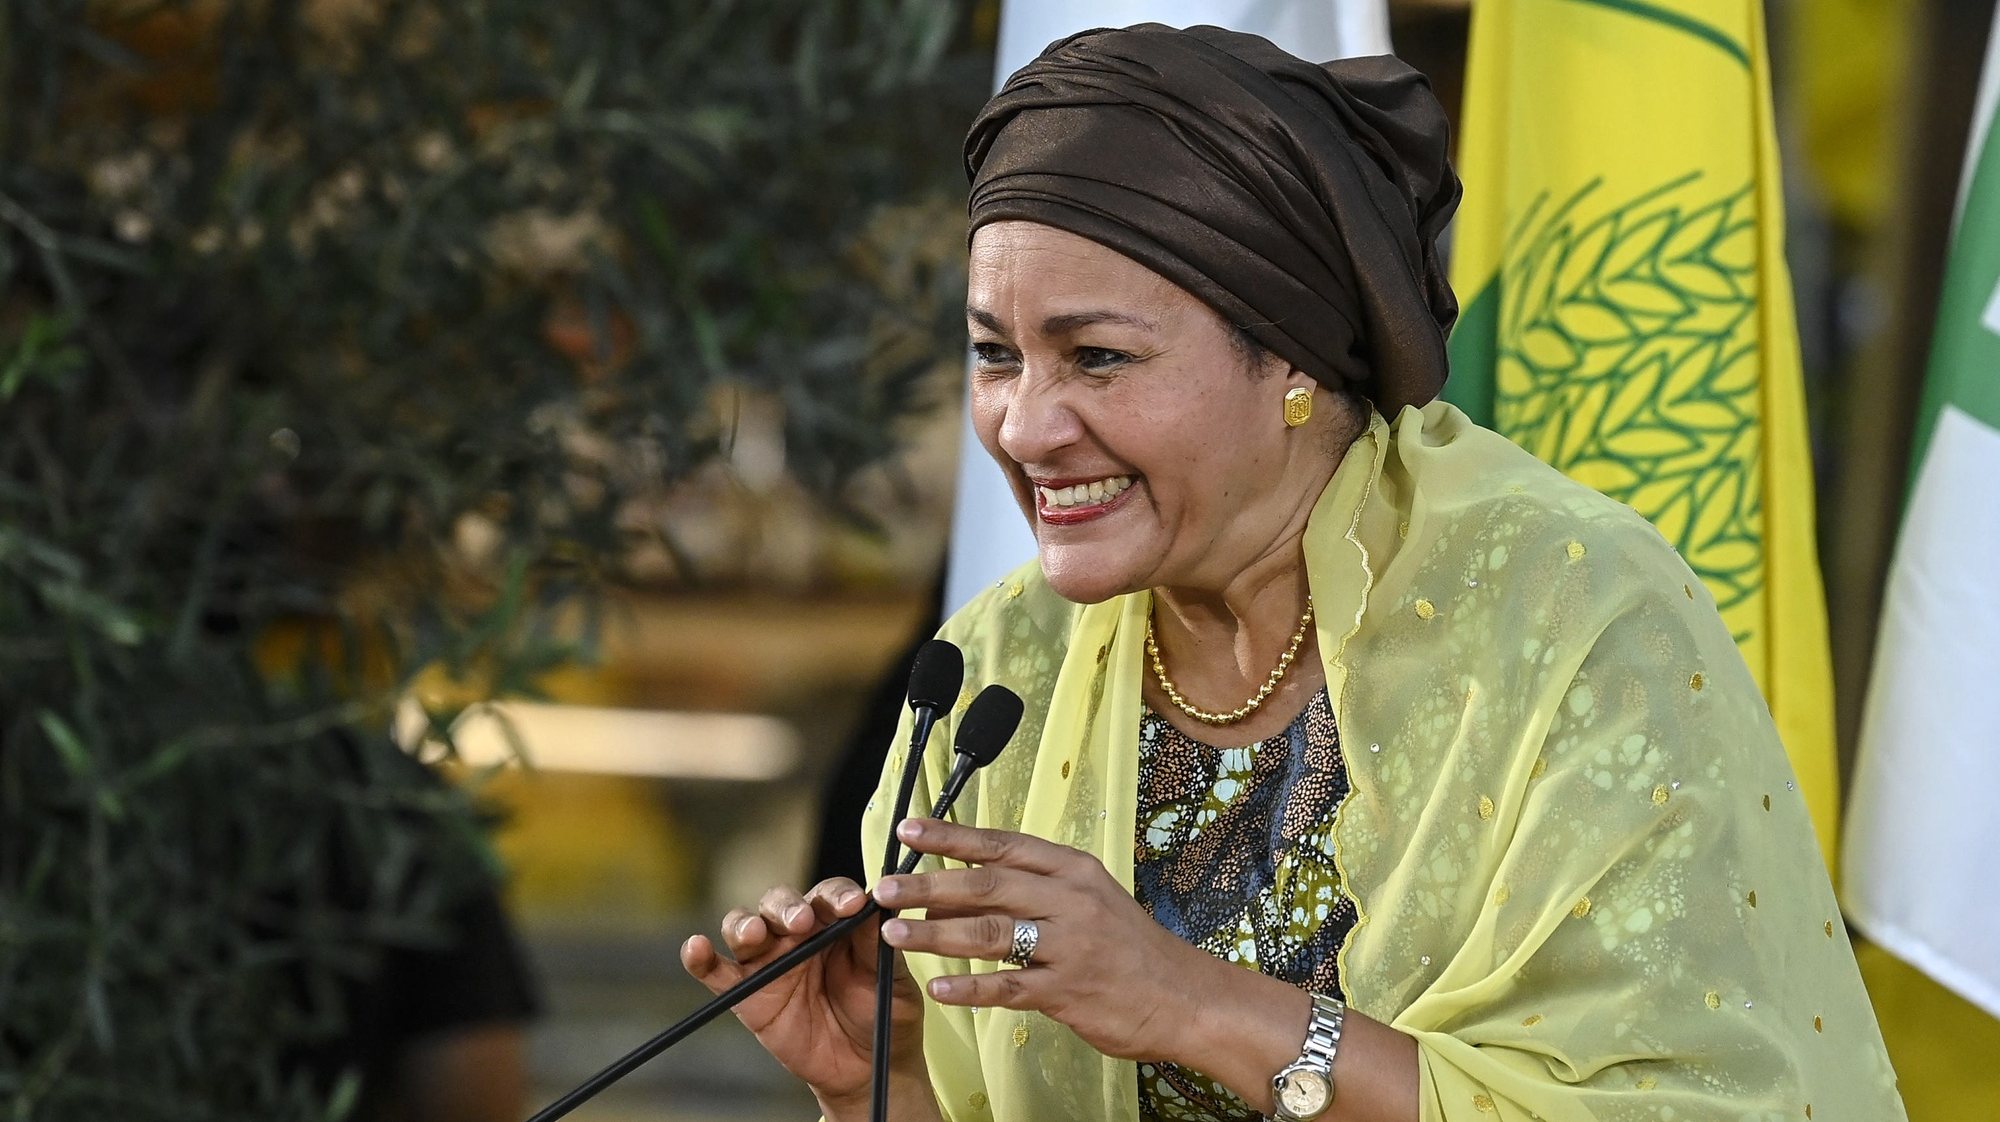 epa09362011 UN Deputy Secretary General Amina Mohammed delivers a speech during her visit to a farmers&#039; market in Rome, Italy, 24 July 2021. Mohammed is in Rome, where she will attend the Pre-Summit of the UN Food Systems Summit from 26 to 28 July.  EPA/RICCARDO ANTIMIANI